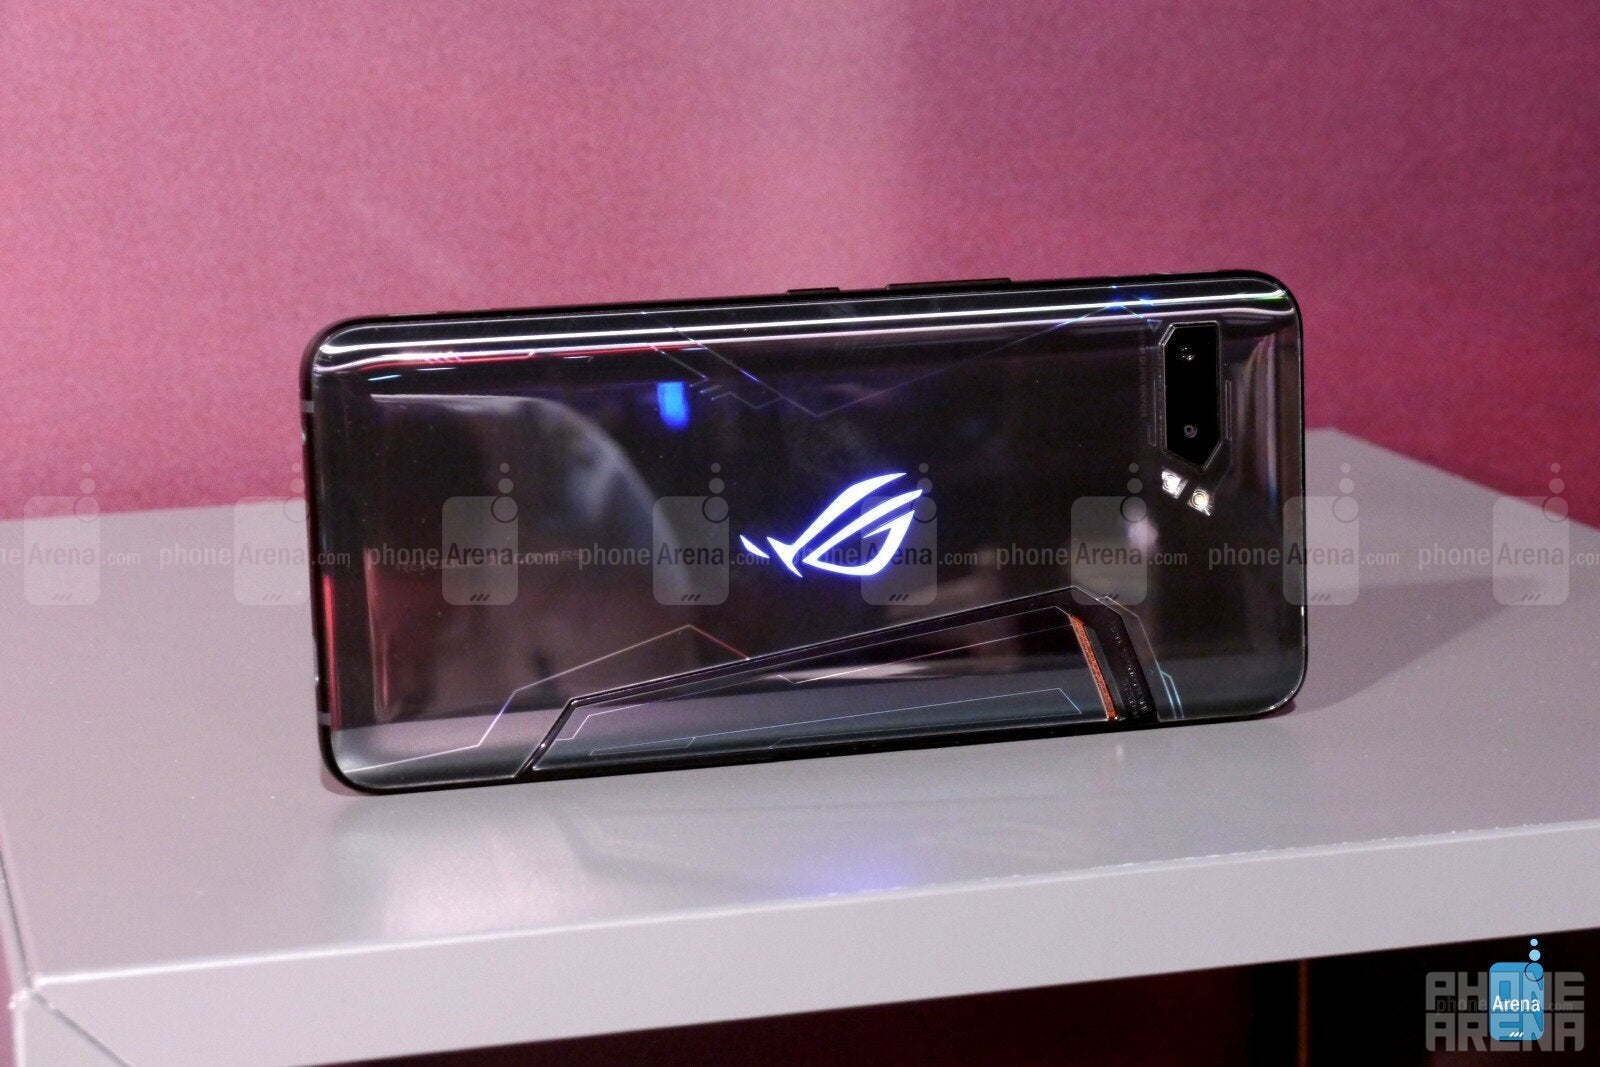 The ROG Phone 2 is here at last - Asus is low-key becoming a force to be reckoned with